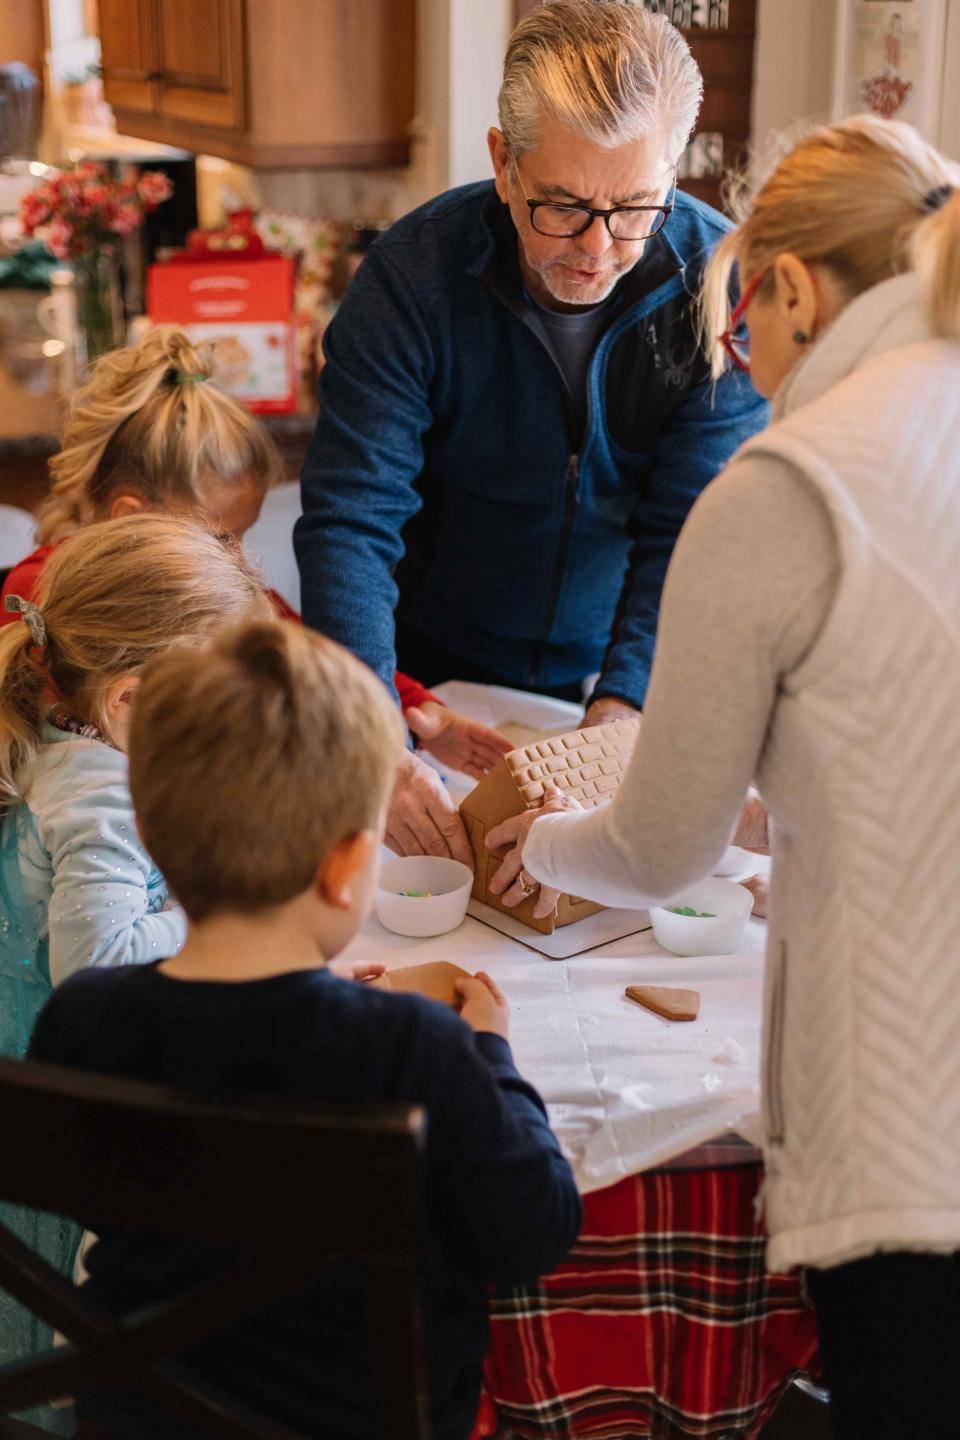 Grandparents creating gingerbread house with grandchildren. Photo by Phillip Goldsberry on Unsplash.